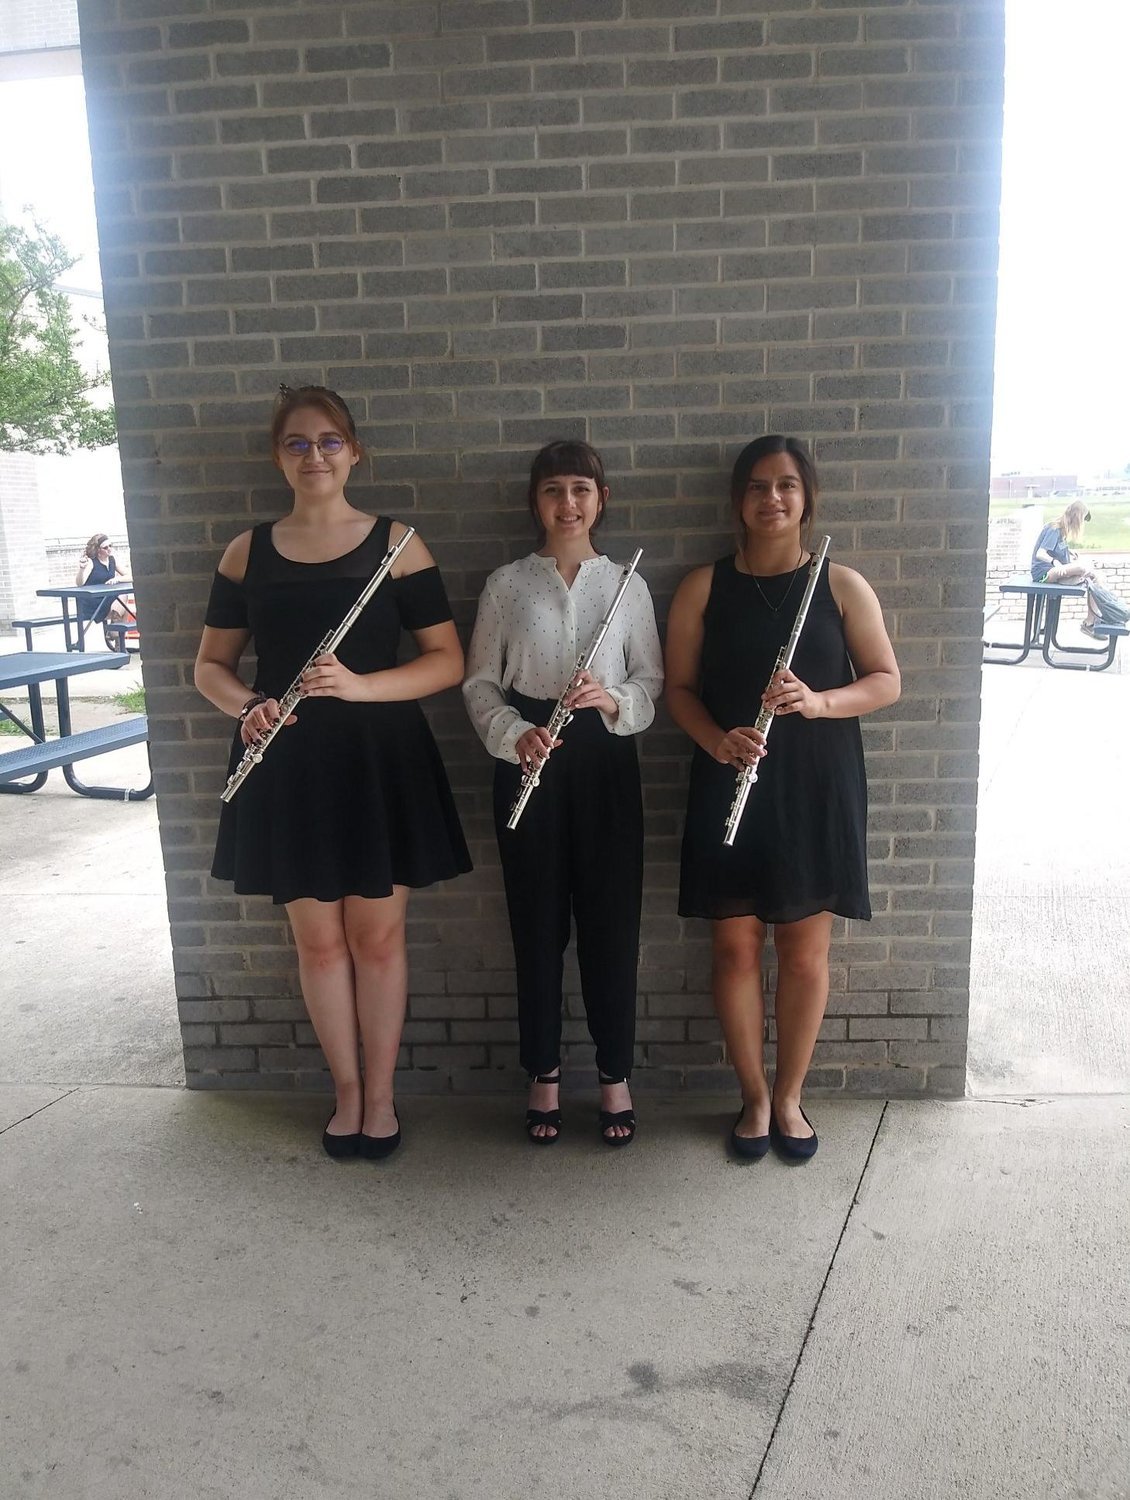 Left to right: Mineola band students Tish Yates, Annalee Cook, Bree Williams were some of the gold medalists at state solo and ensemble contest.